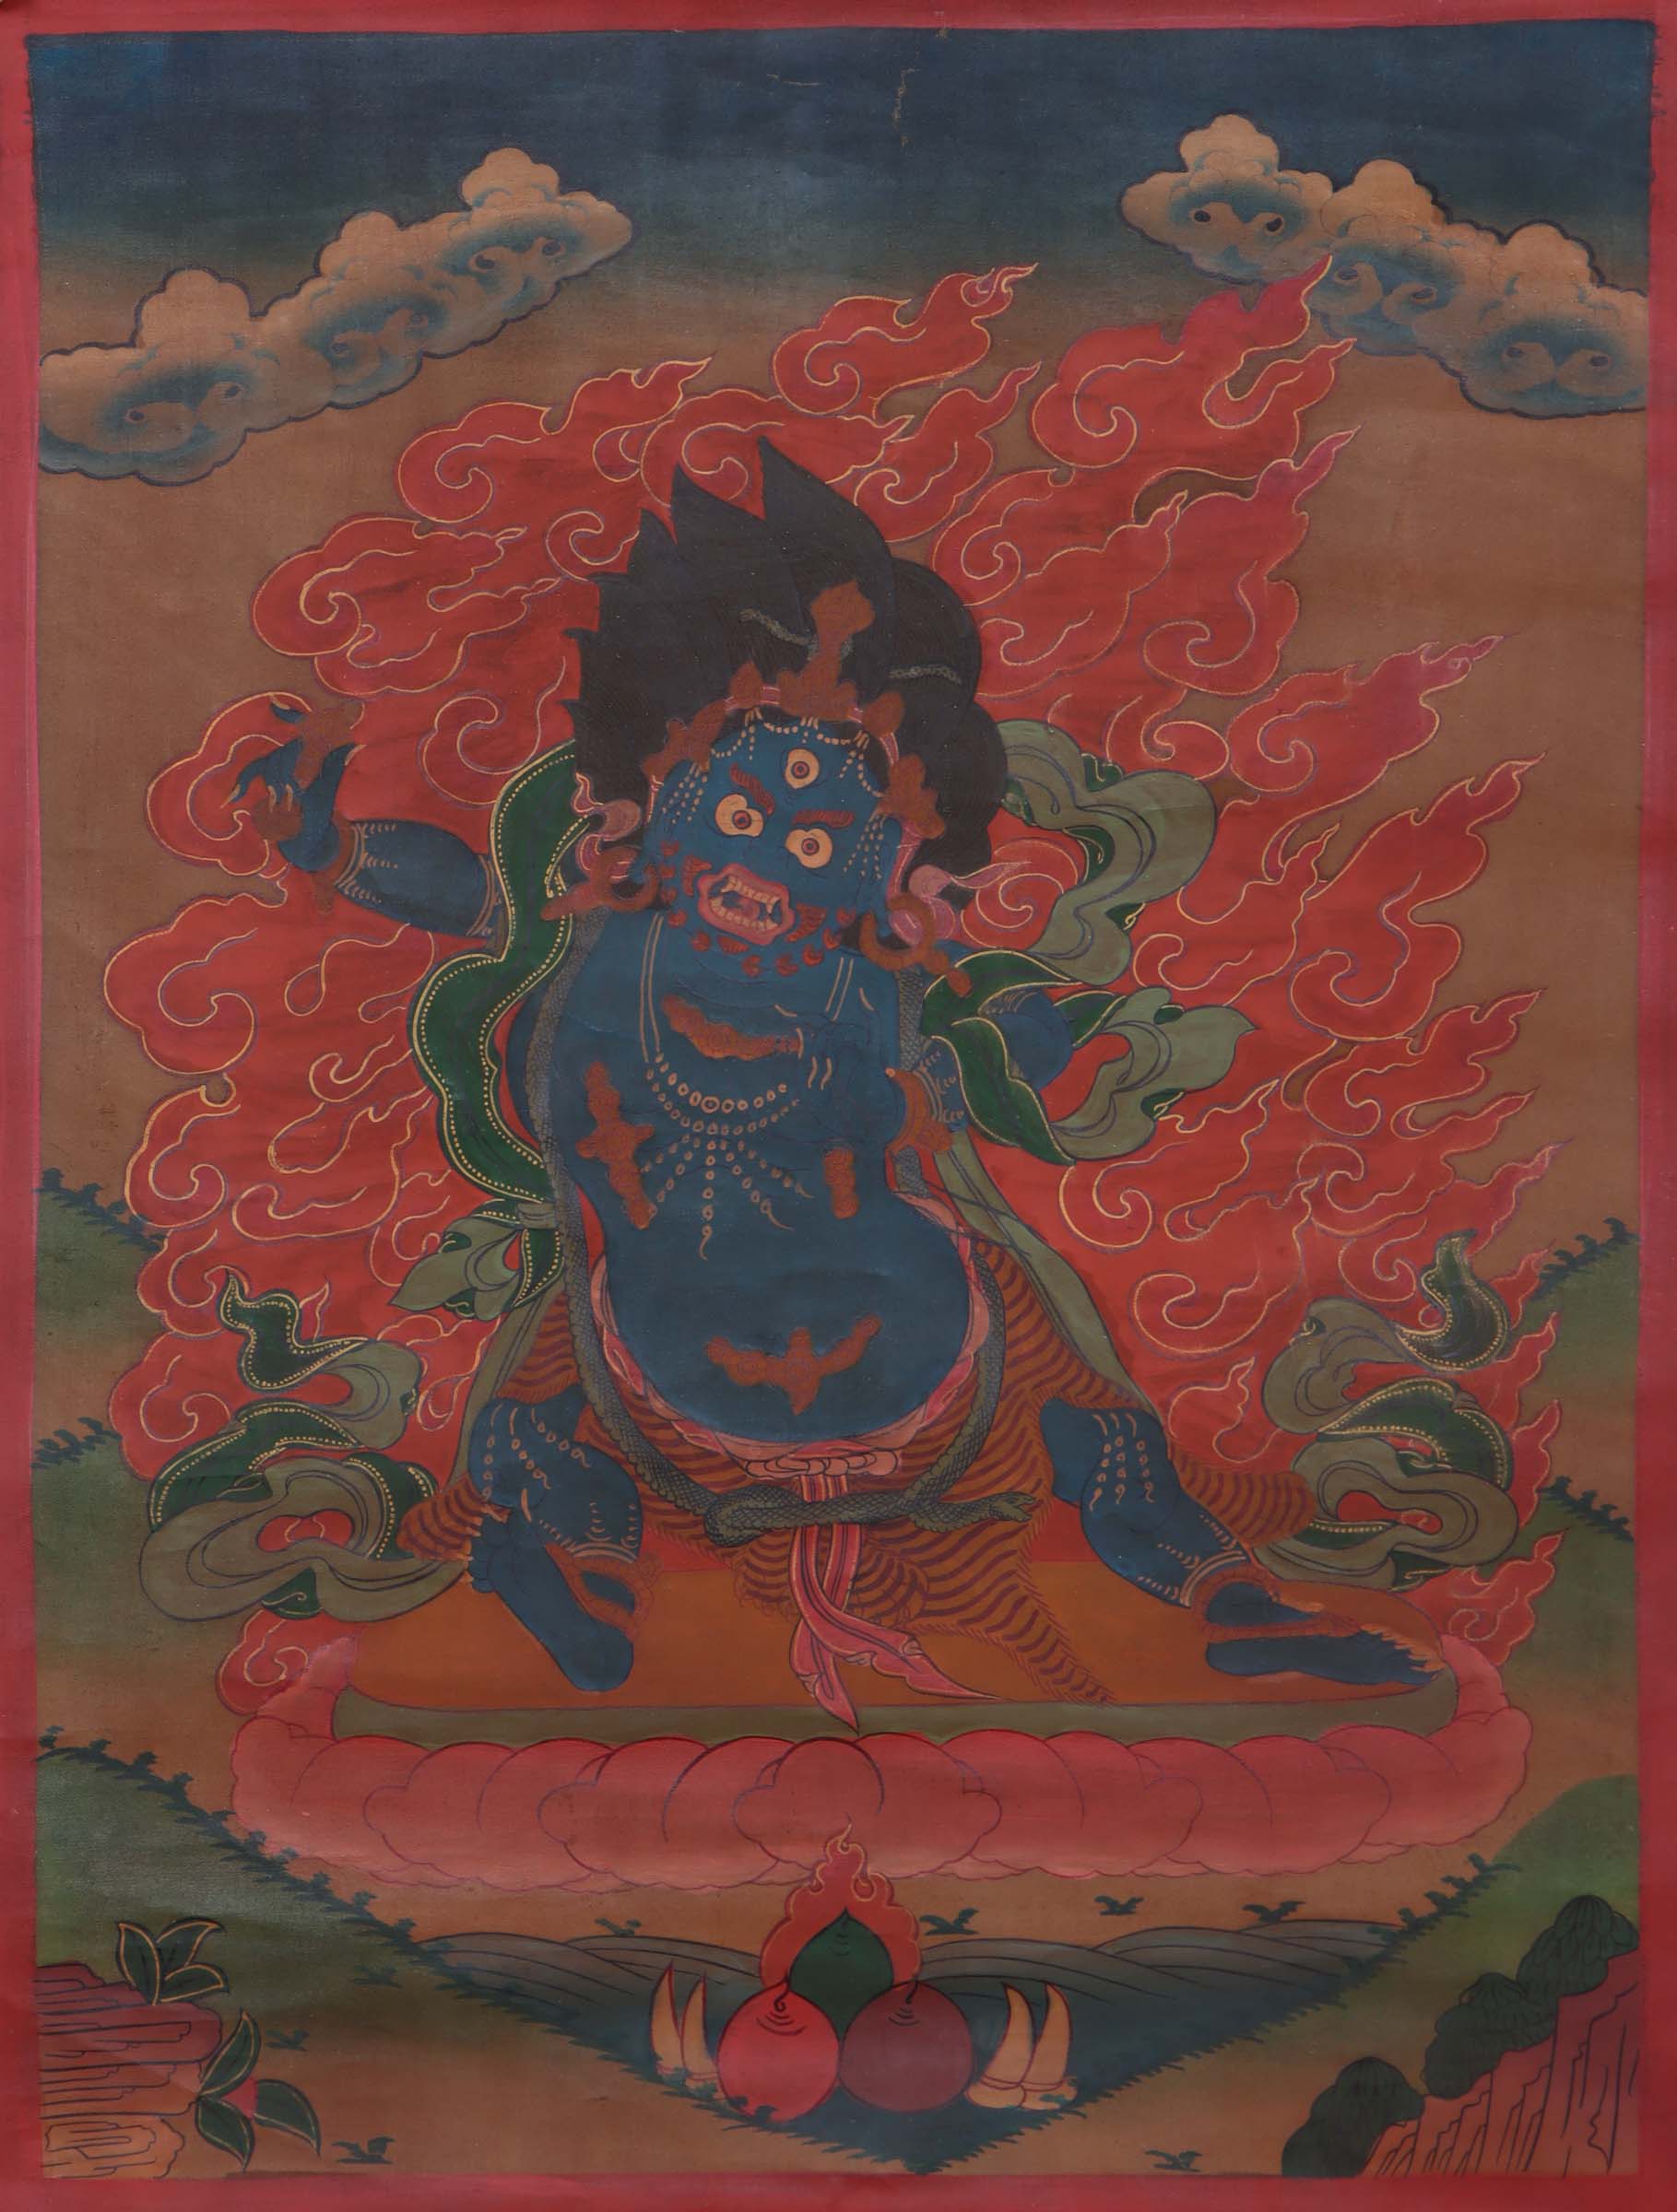 Vajrapani thangka art depicts a powerful Buddhist deity, holding a vajra (thunderbolt) in one hand and a lasso in the other. His fierce expression represents his ability to conquer obstacles and protect against negative influences.